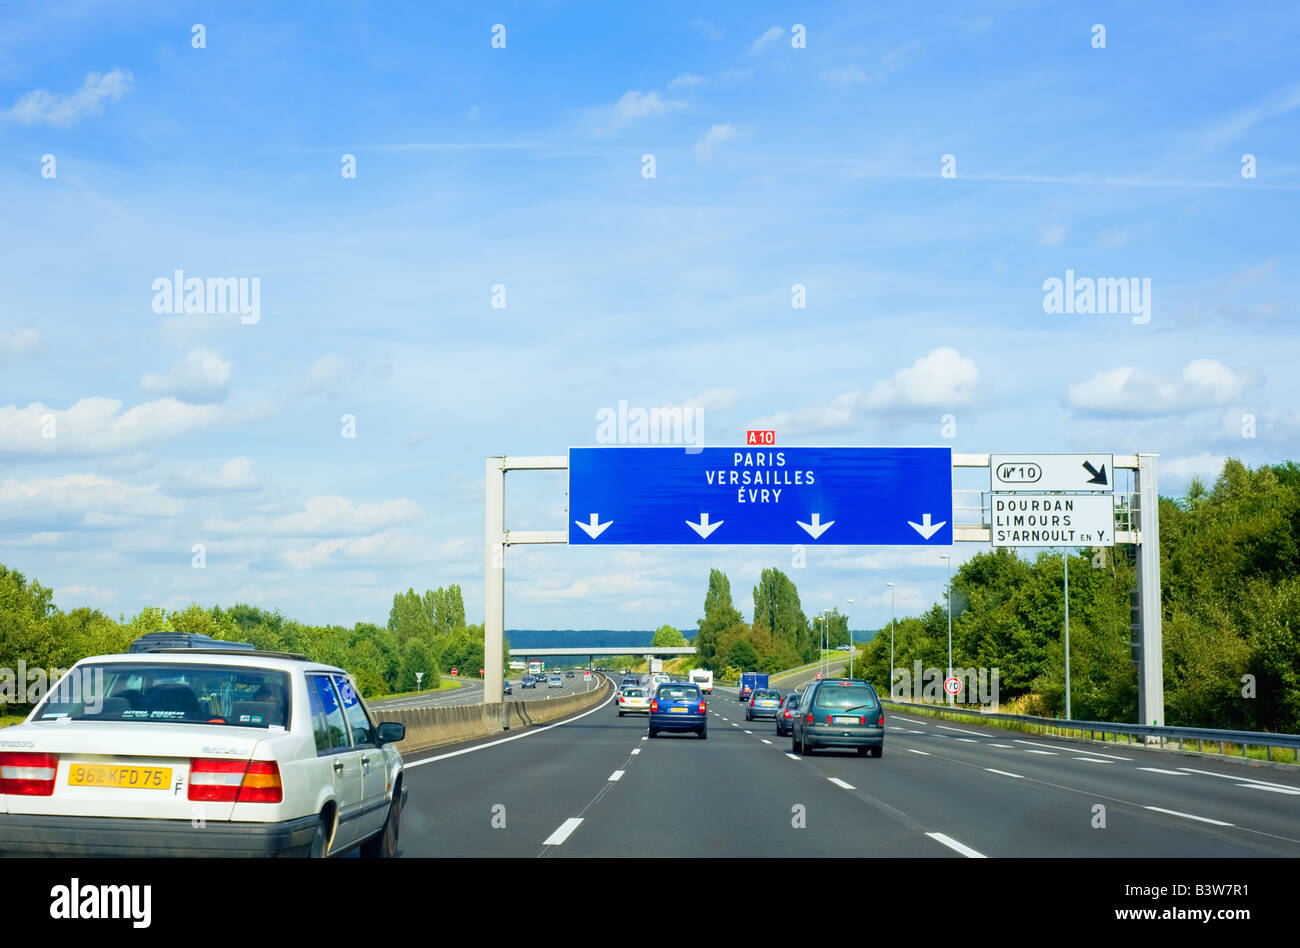 Cars and road signs on A10 highway heading to Paris, Ile-de-France, France, Europe Stock Photo